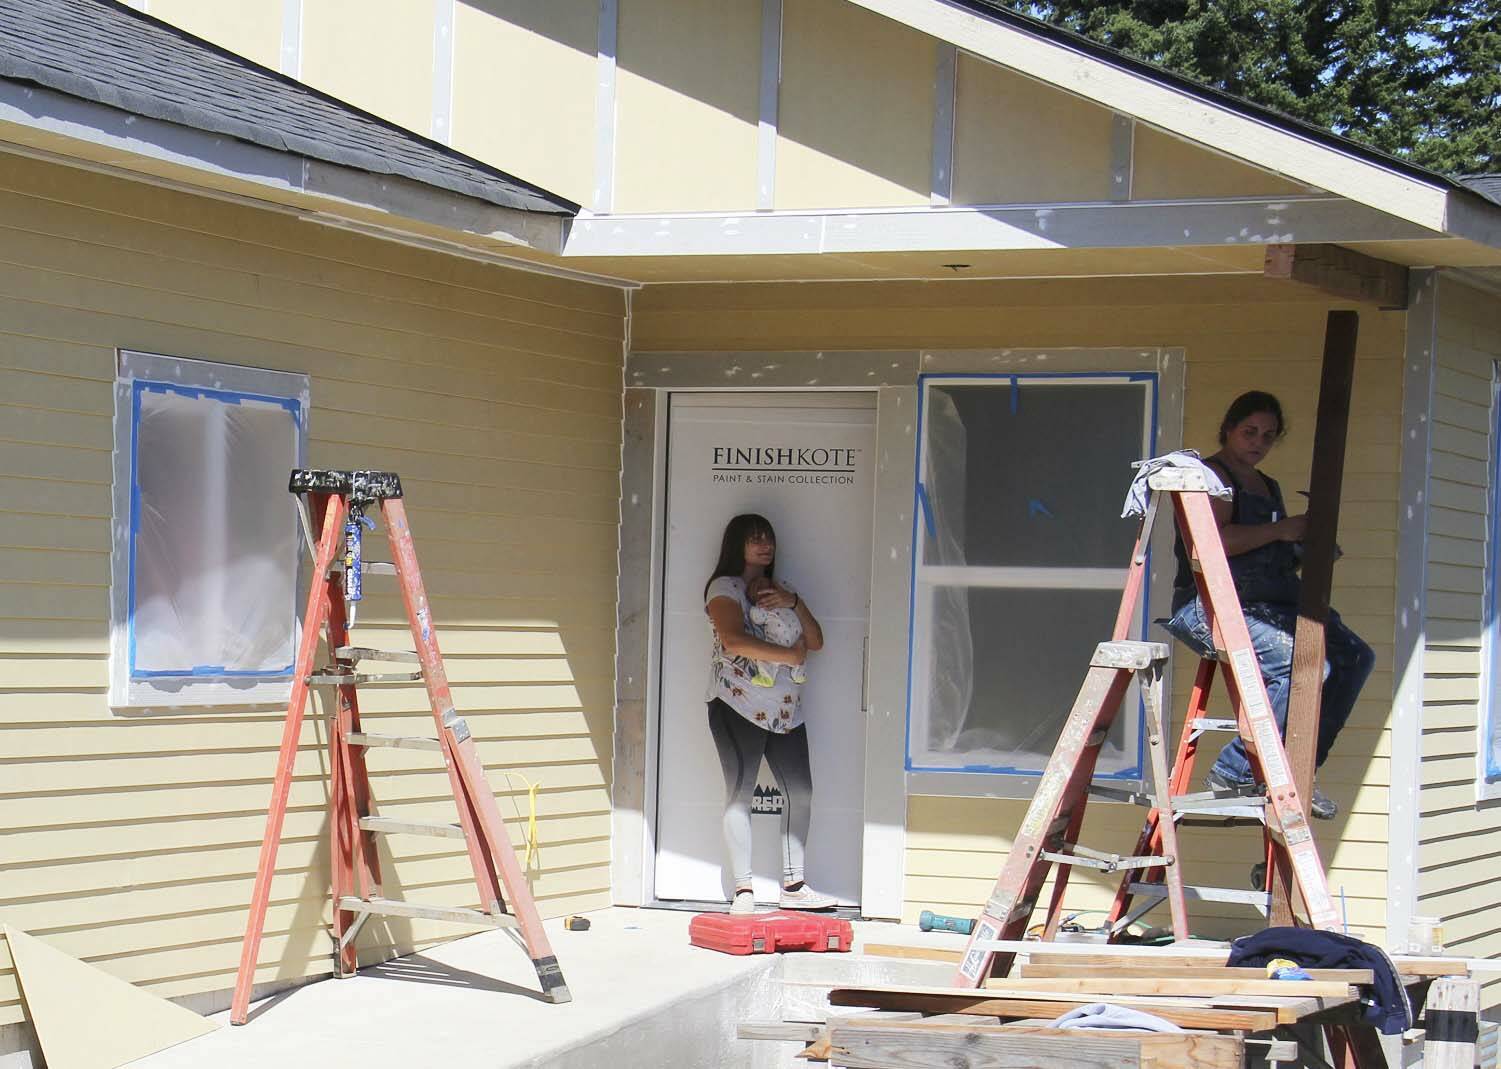 Several participants in the Mutual Self-Help build, on Maloney Lane, were prepping this house on Friday for painting that was to take place on Saturday.